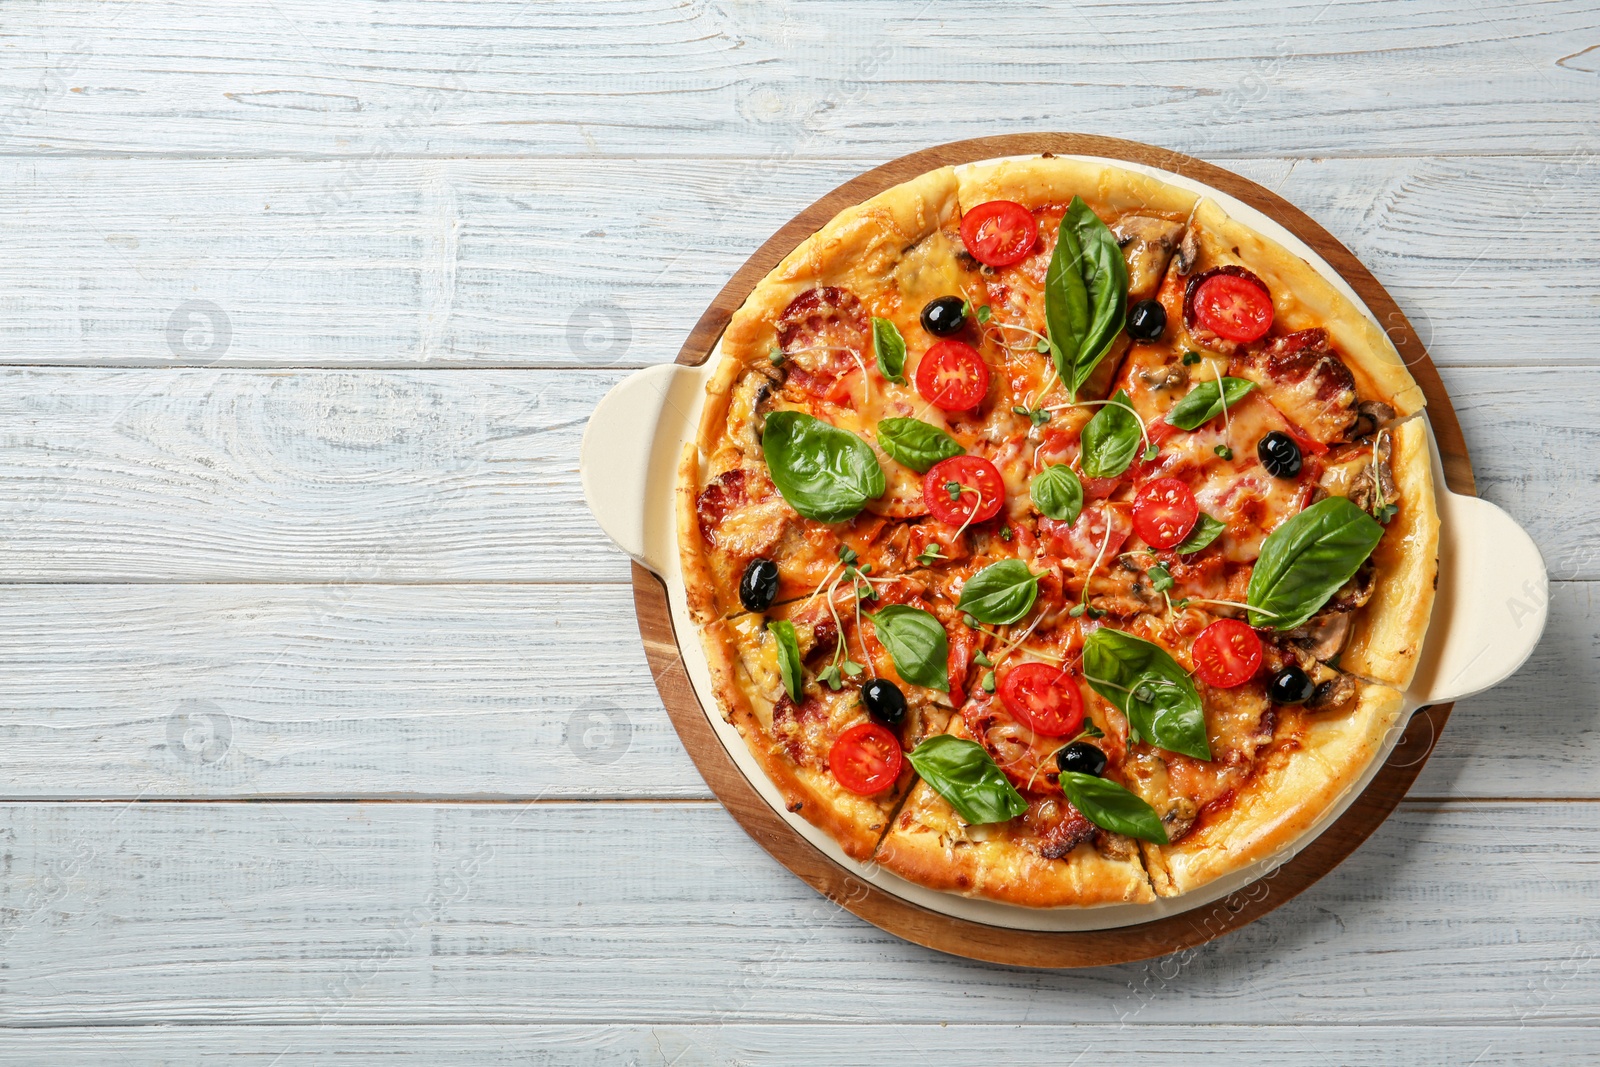 Photo of Tasty homemade pizza and space for text on wooden table, top view